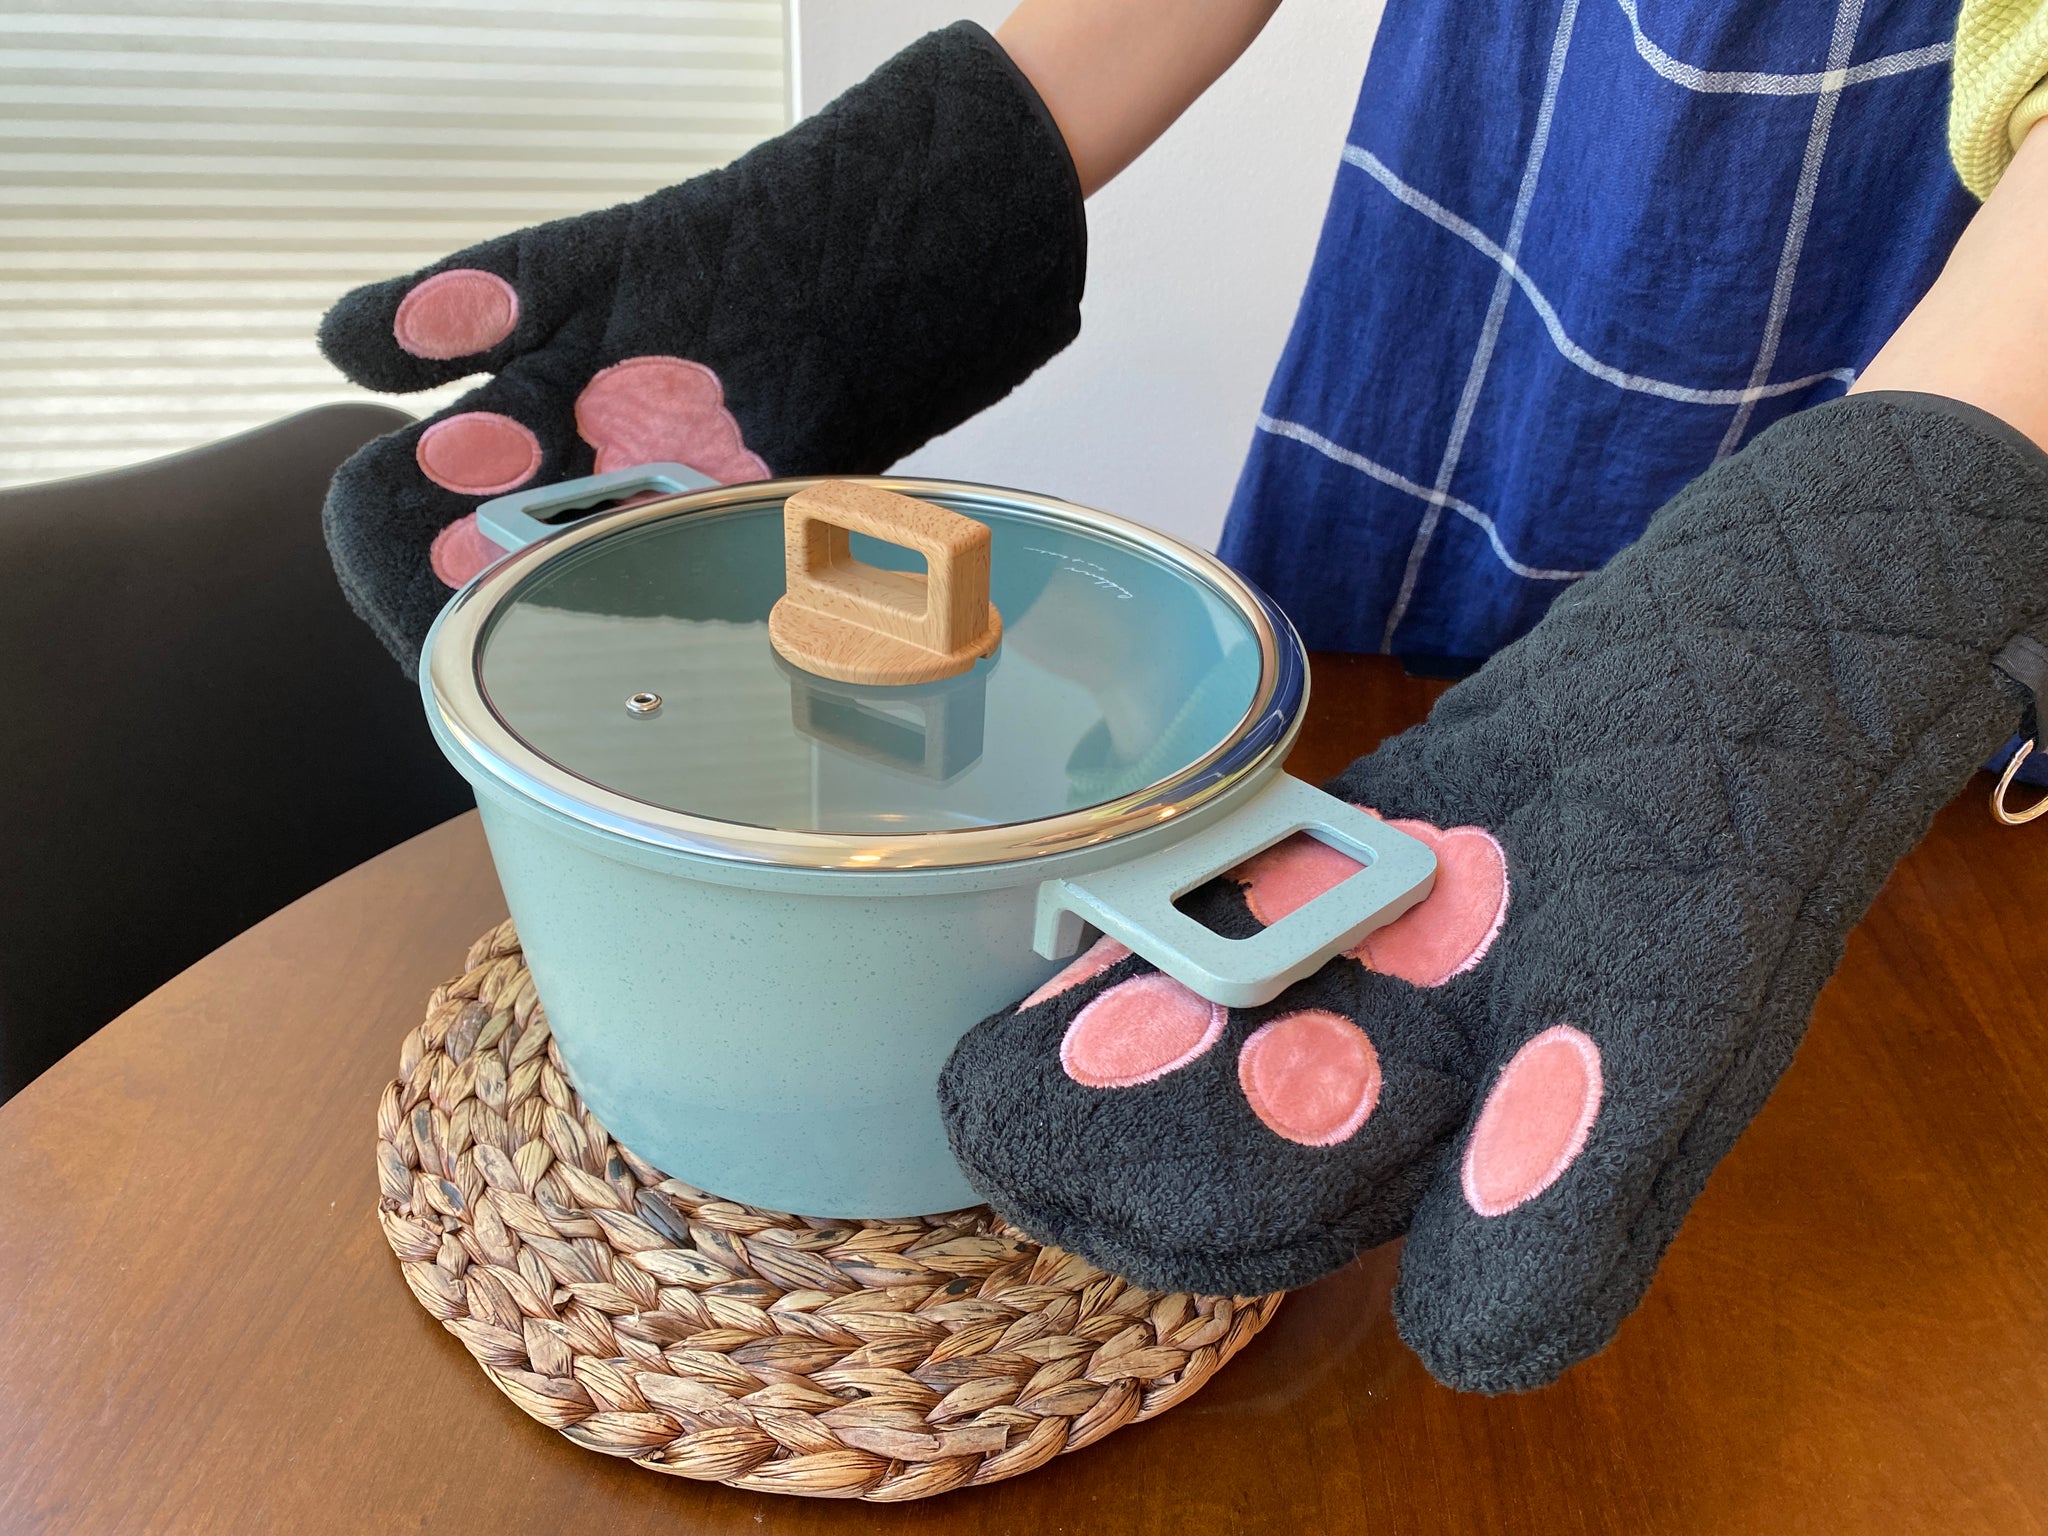 Cute Cartoon Cat Paws Oven Mitts - Chaiyat Boutique